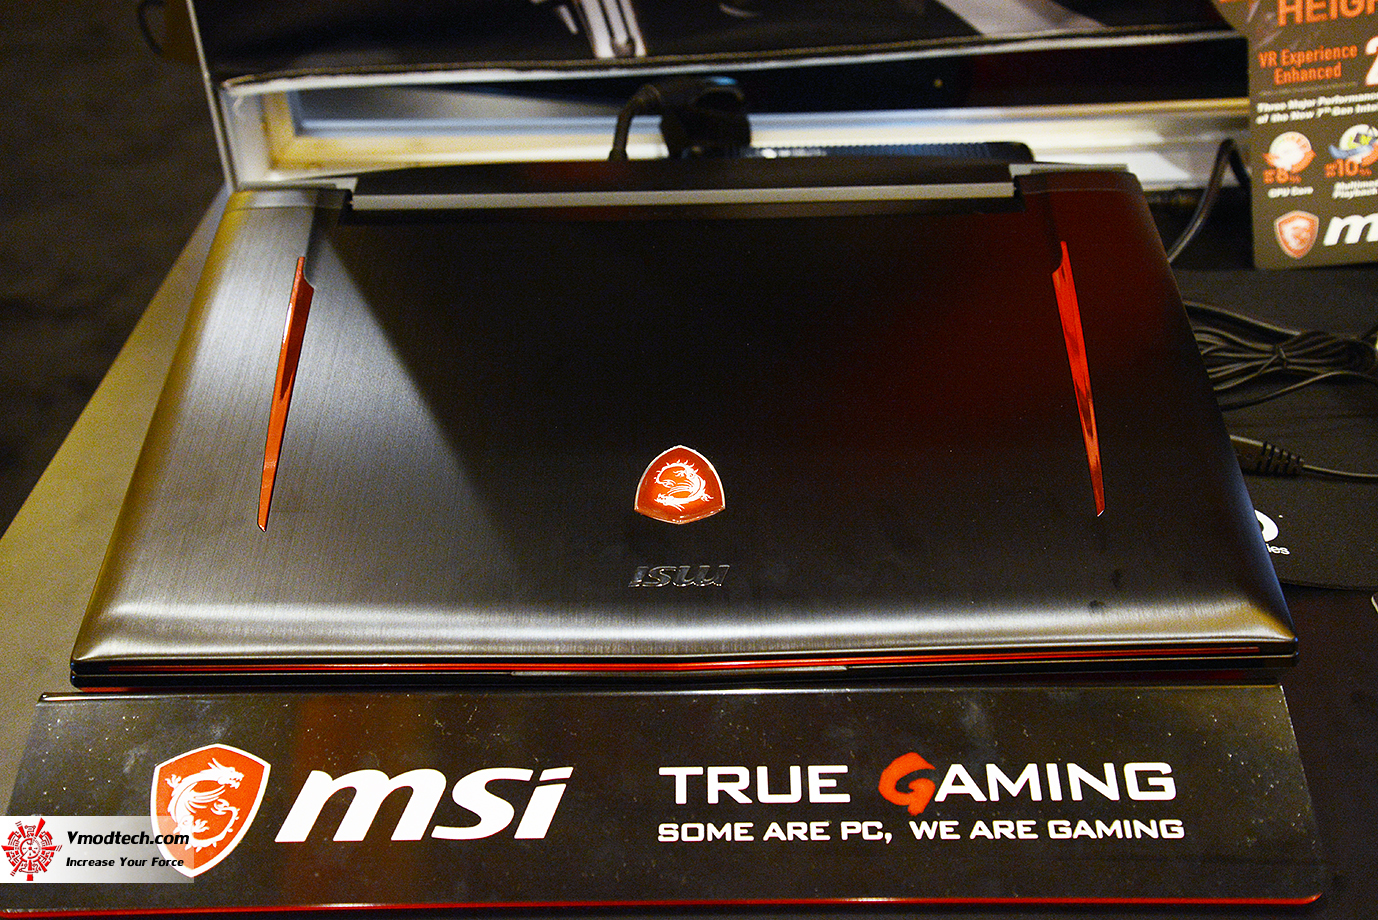 dsc 1788 MSI GAMING NOTEBOOK CES2017 LAS VEGAS PREVIEW